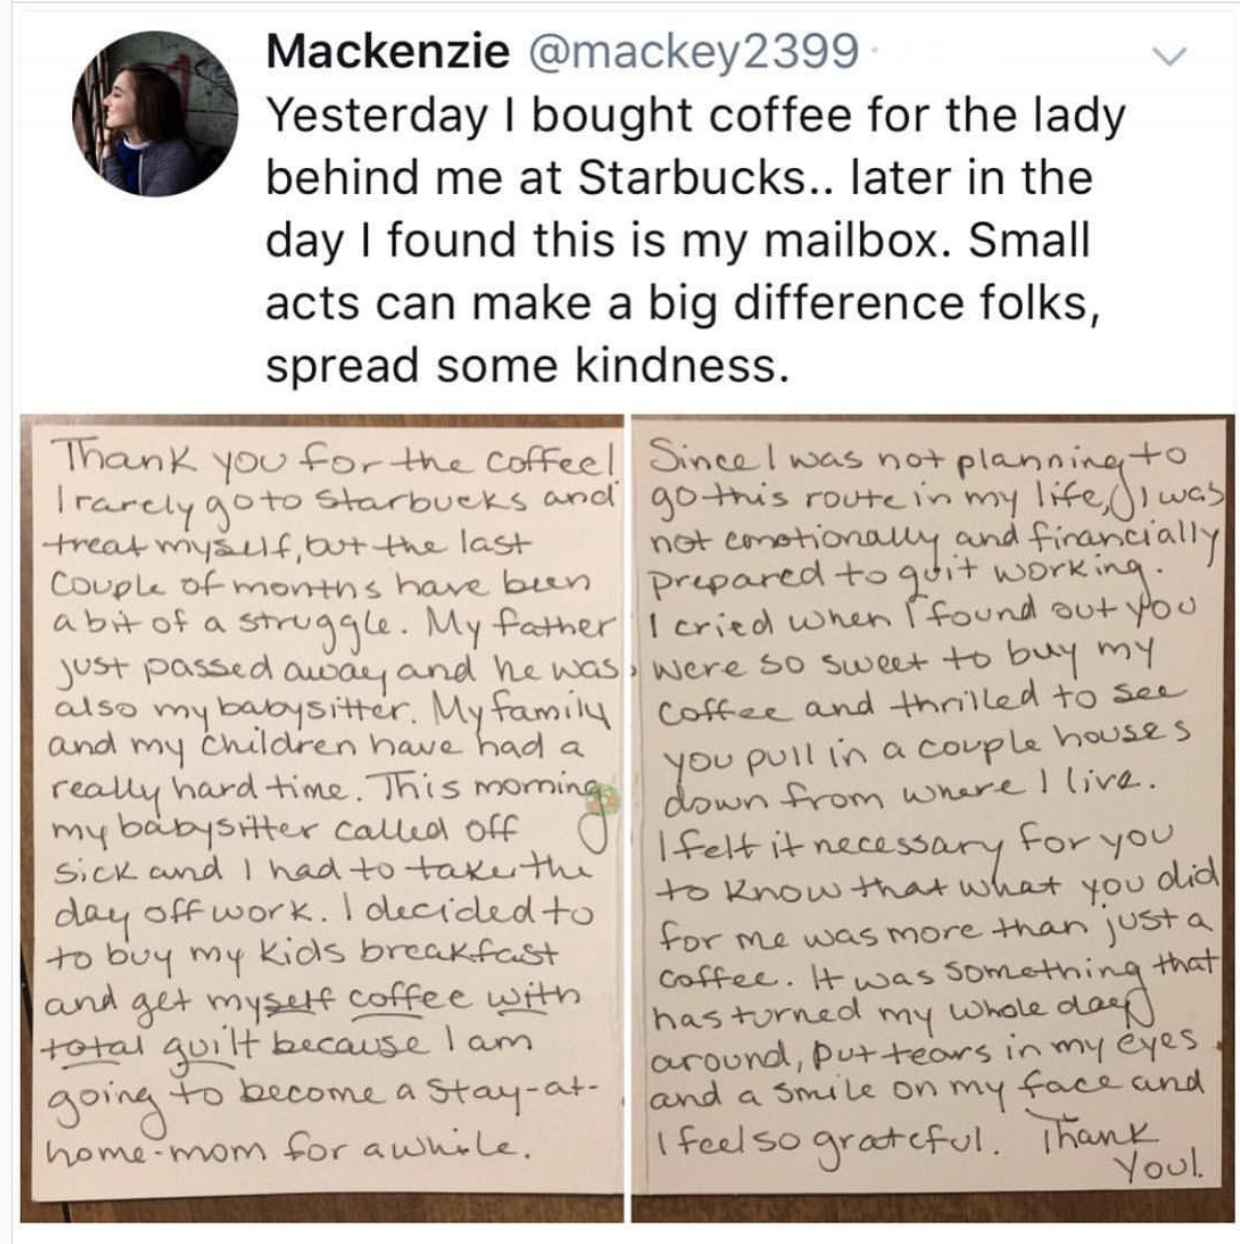 document - Mackenzie Yesterday I bought coffee for the lady behind me at Starbucks.. later in the day I found this is my mailbox. Small acts can make a big difference folks, spread some kindness. Thank you for the coffeel Since I was not planning to I rar